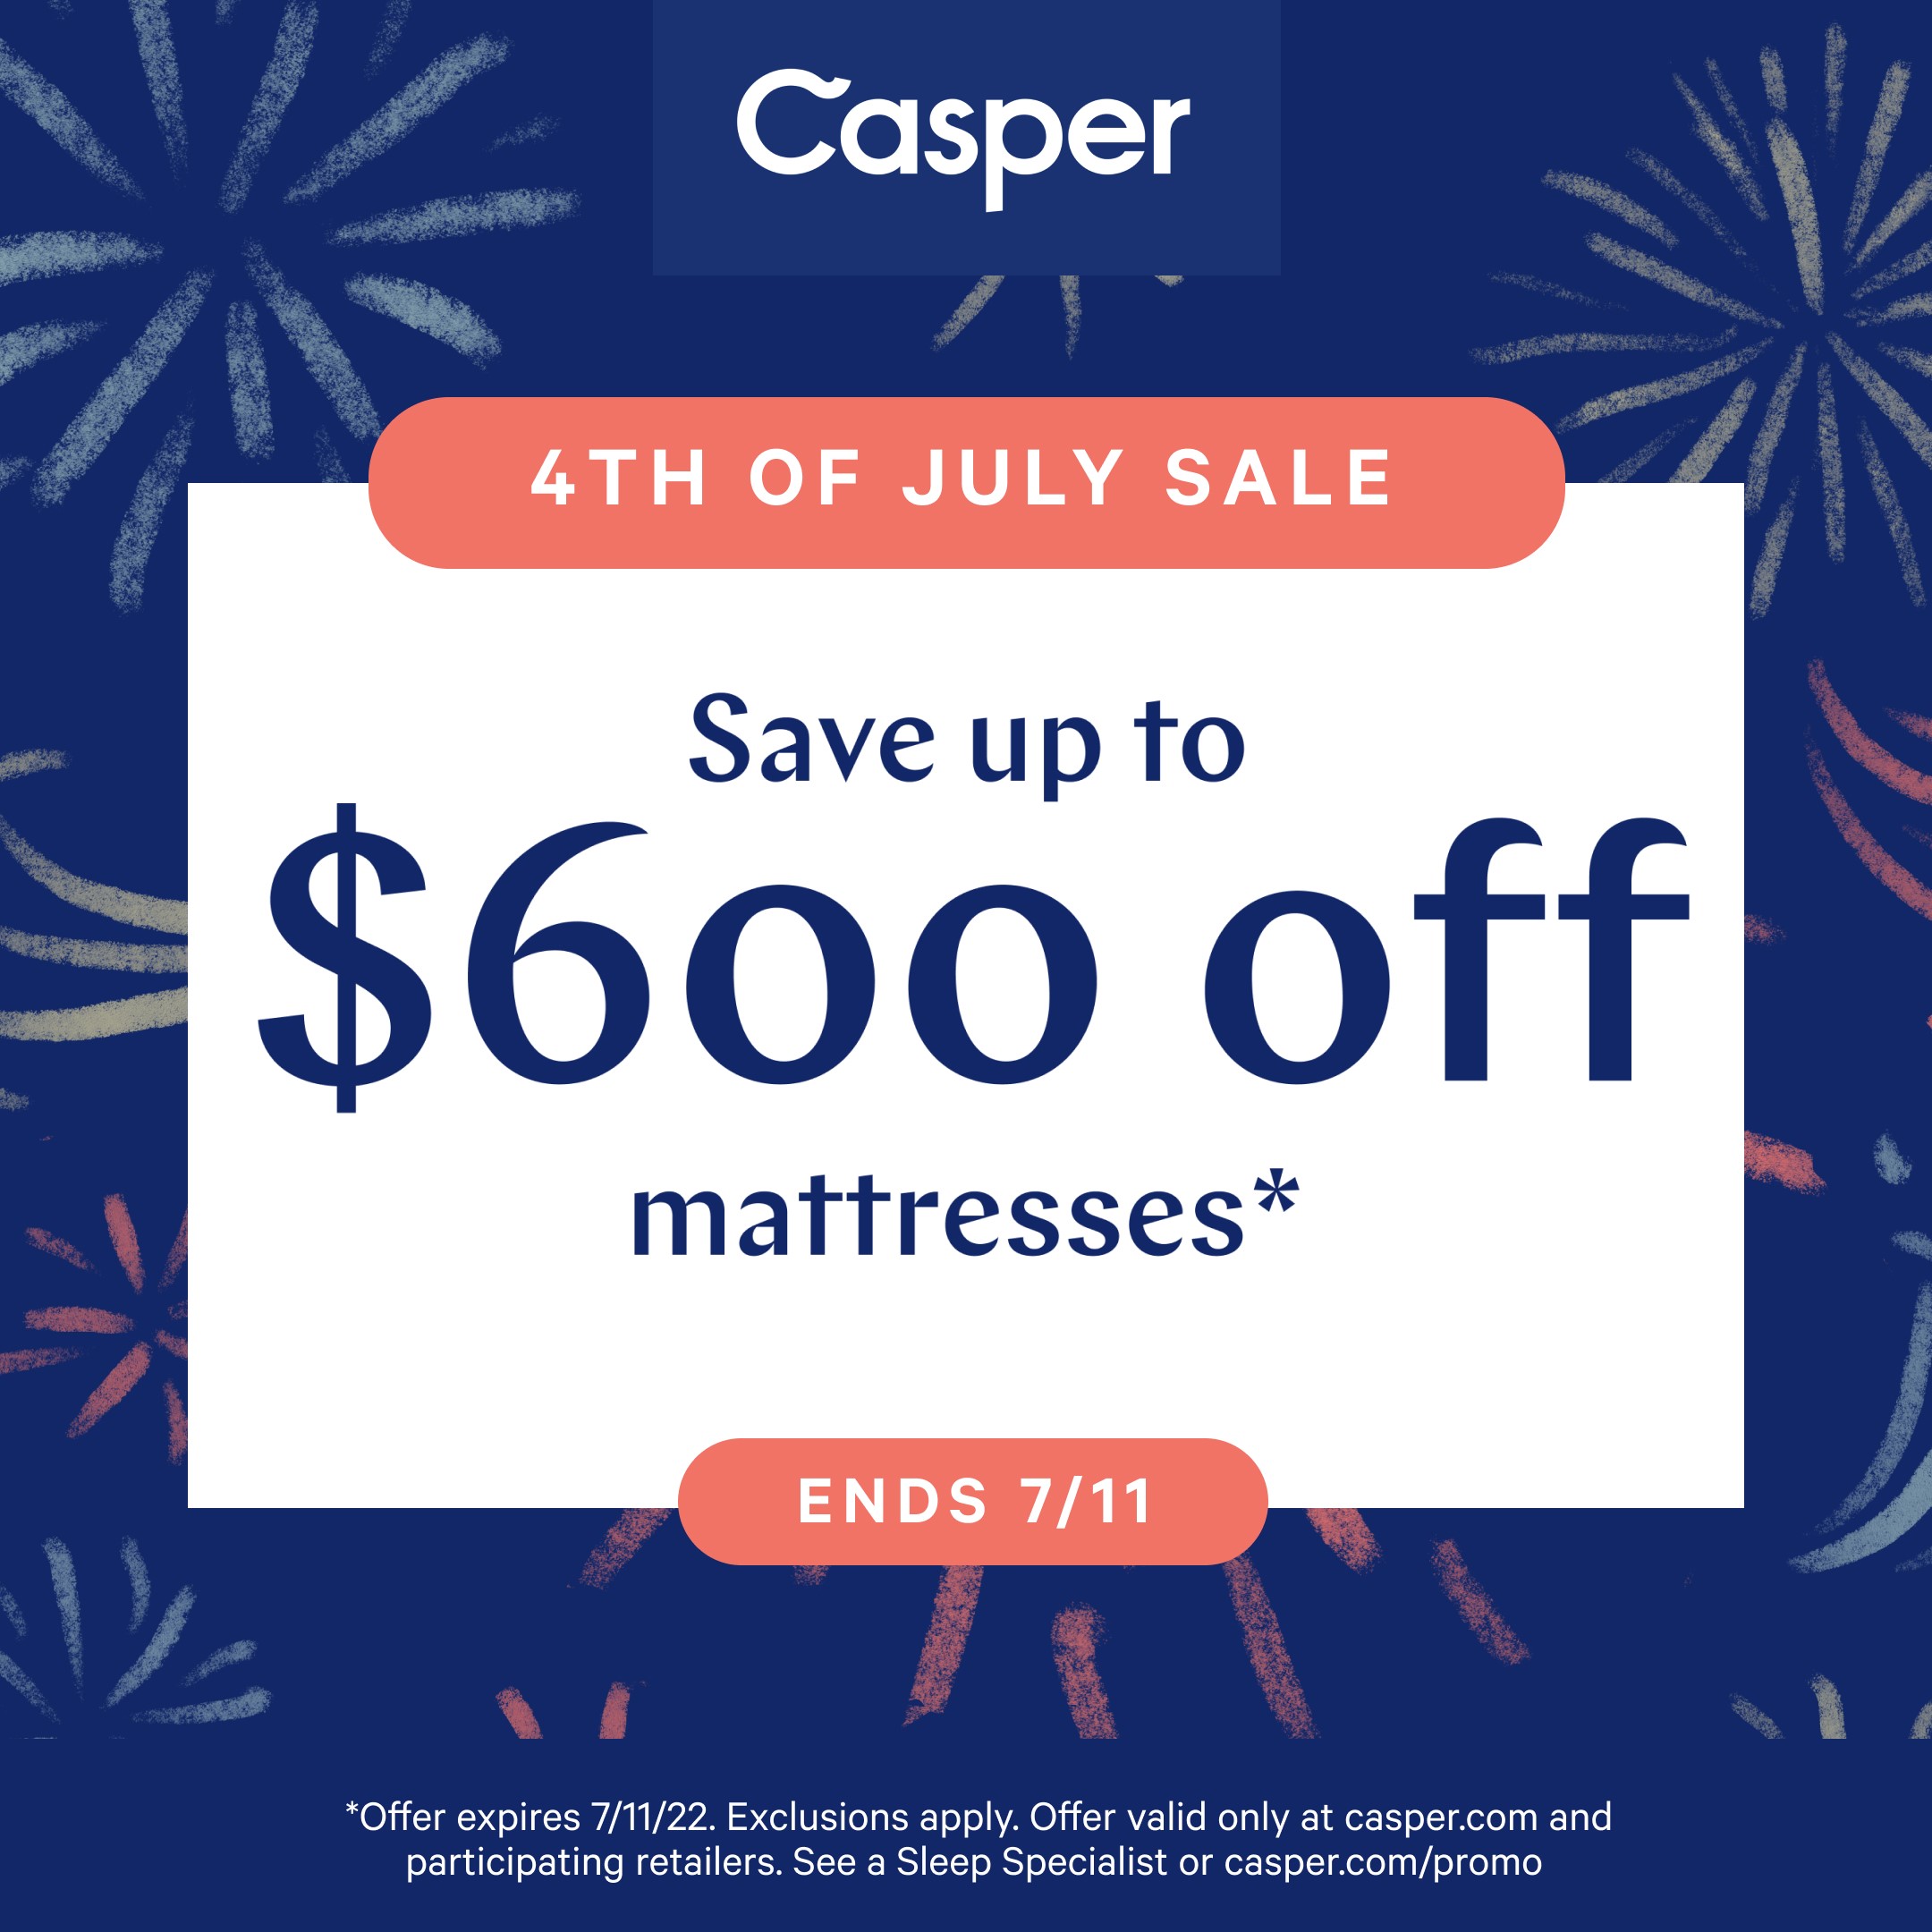 The biggest bang for your buck: Casper's 4th of July Sale!